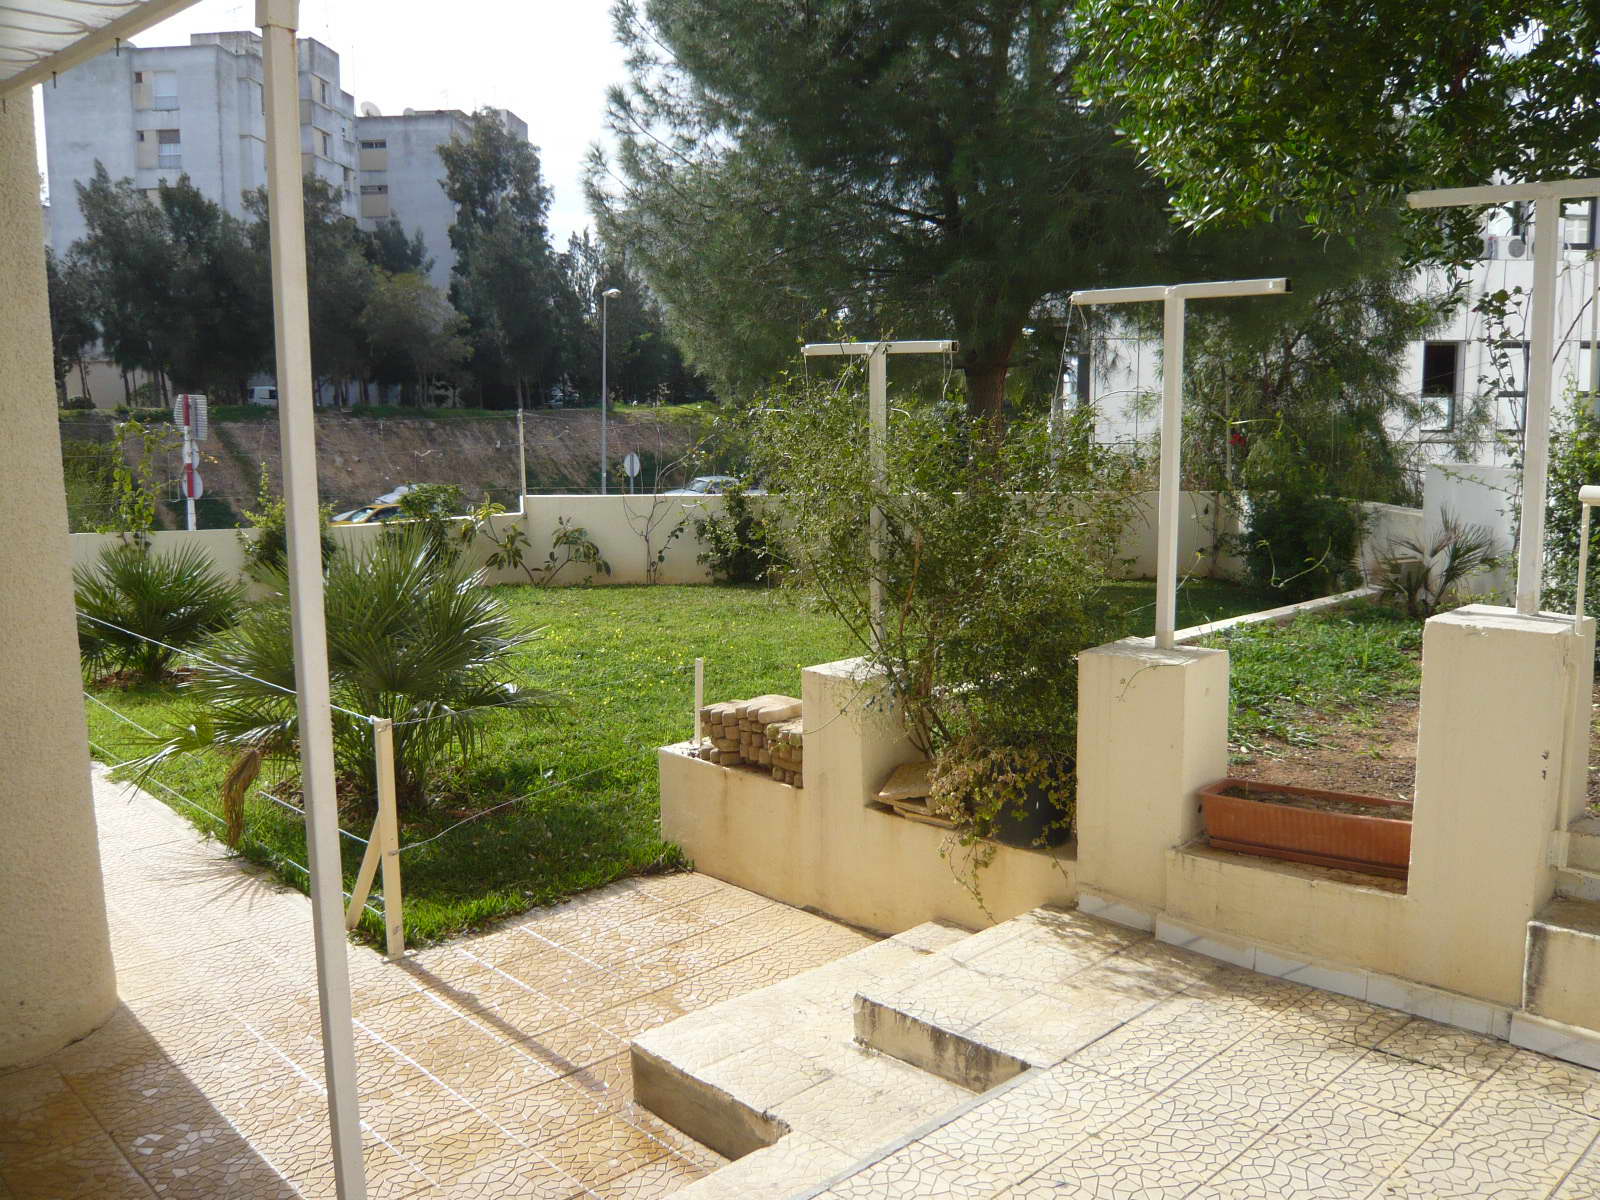 images_immo/tunis_immobilier111026d1.jpg